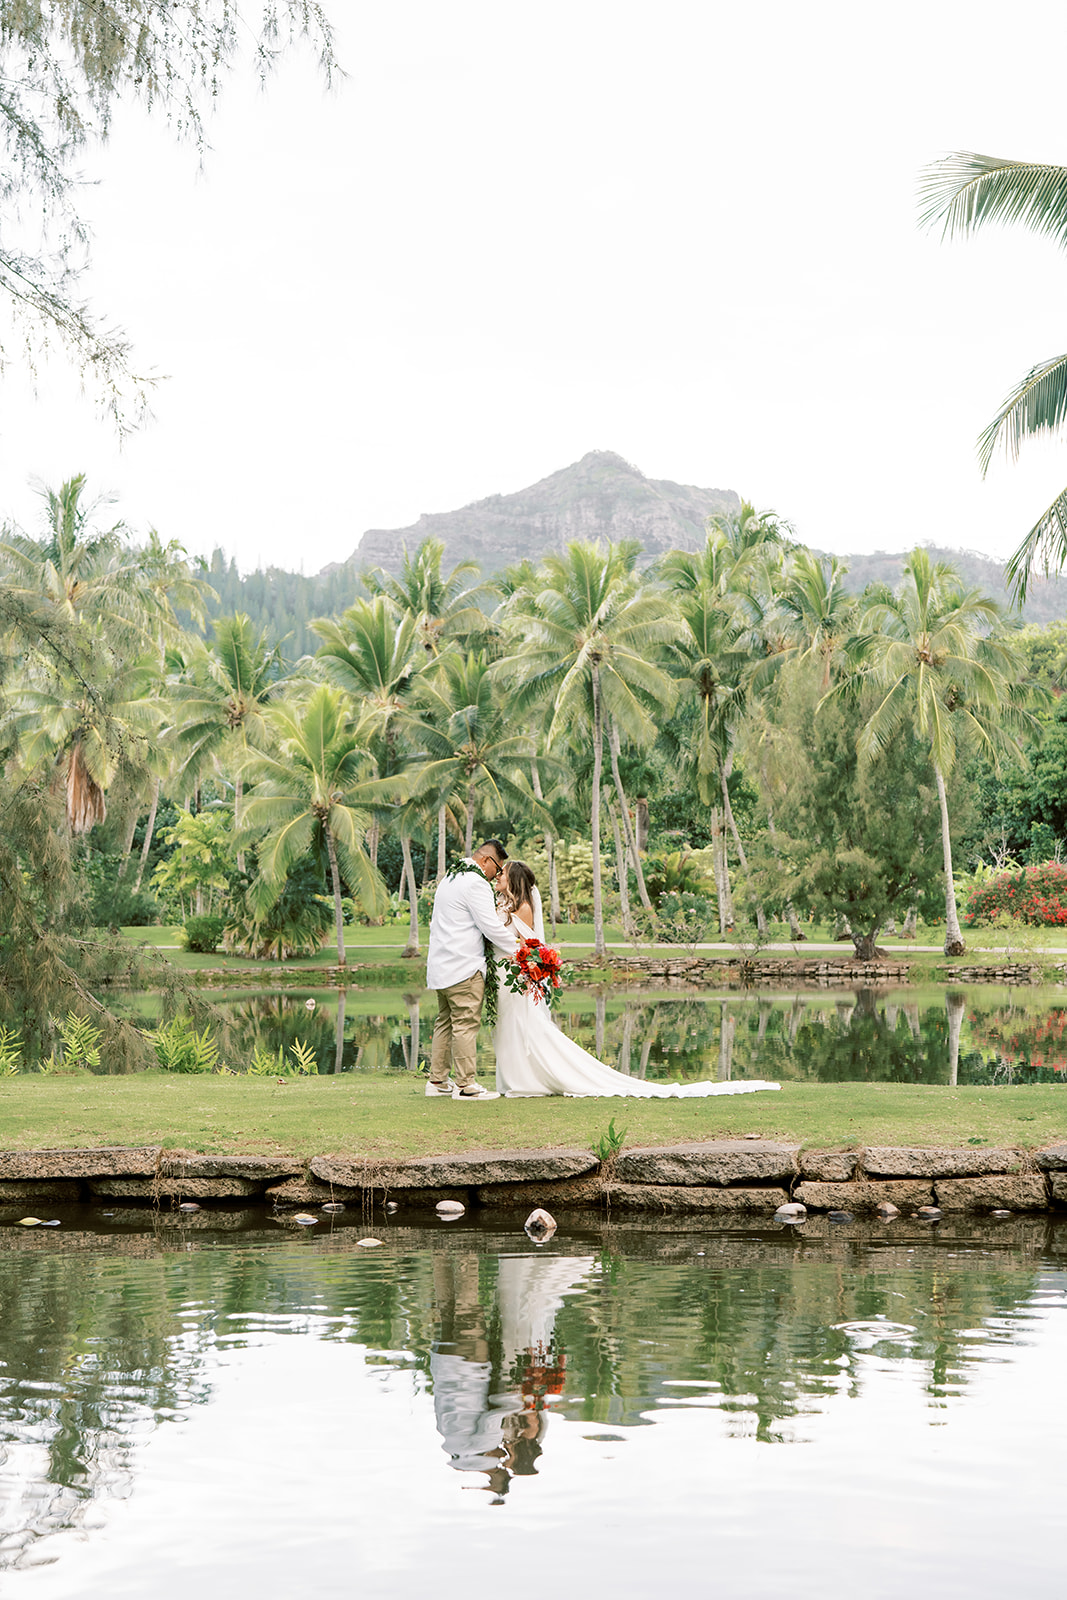 Couple embracing at a tropical lakeside with palm trees and mountain in the background taken by Megan Moura